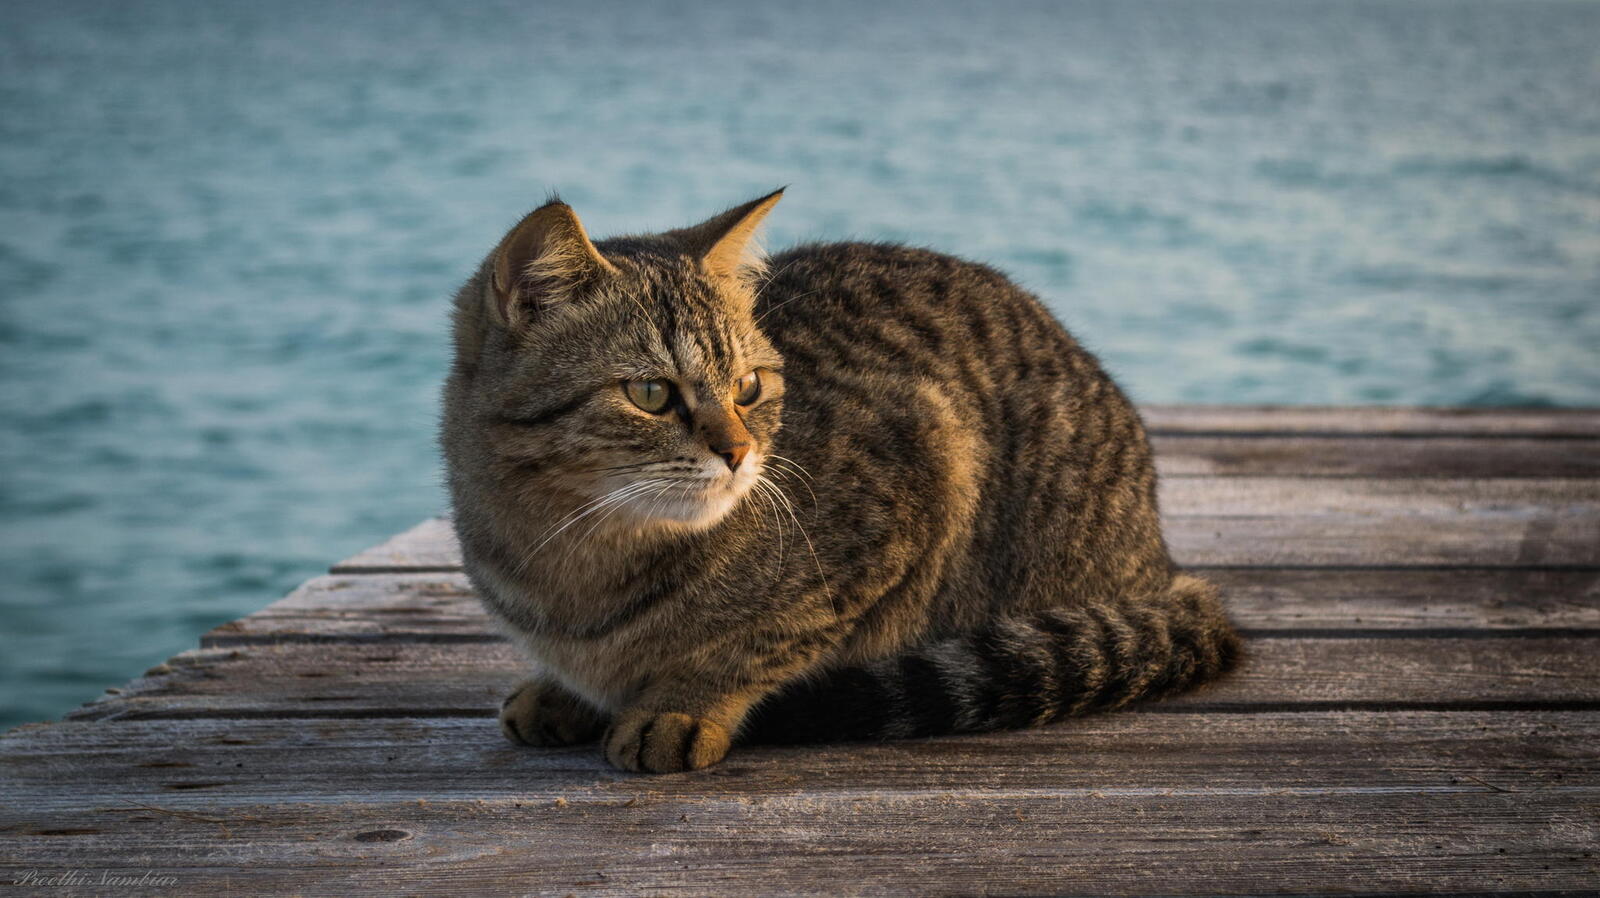 Free photo A cat sits on a wooden pier